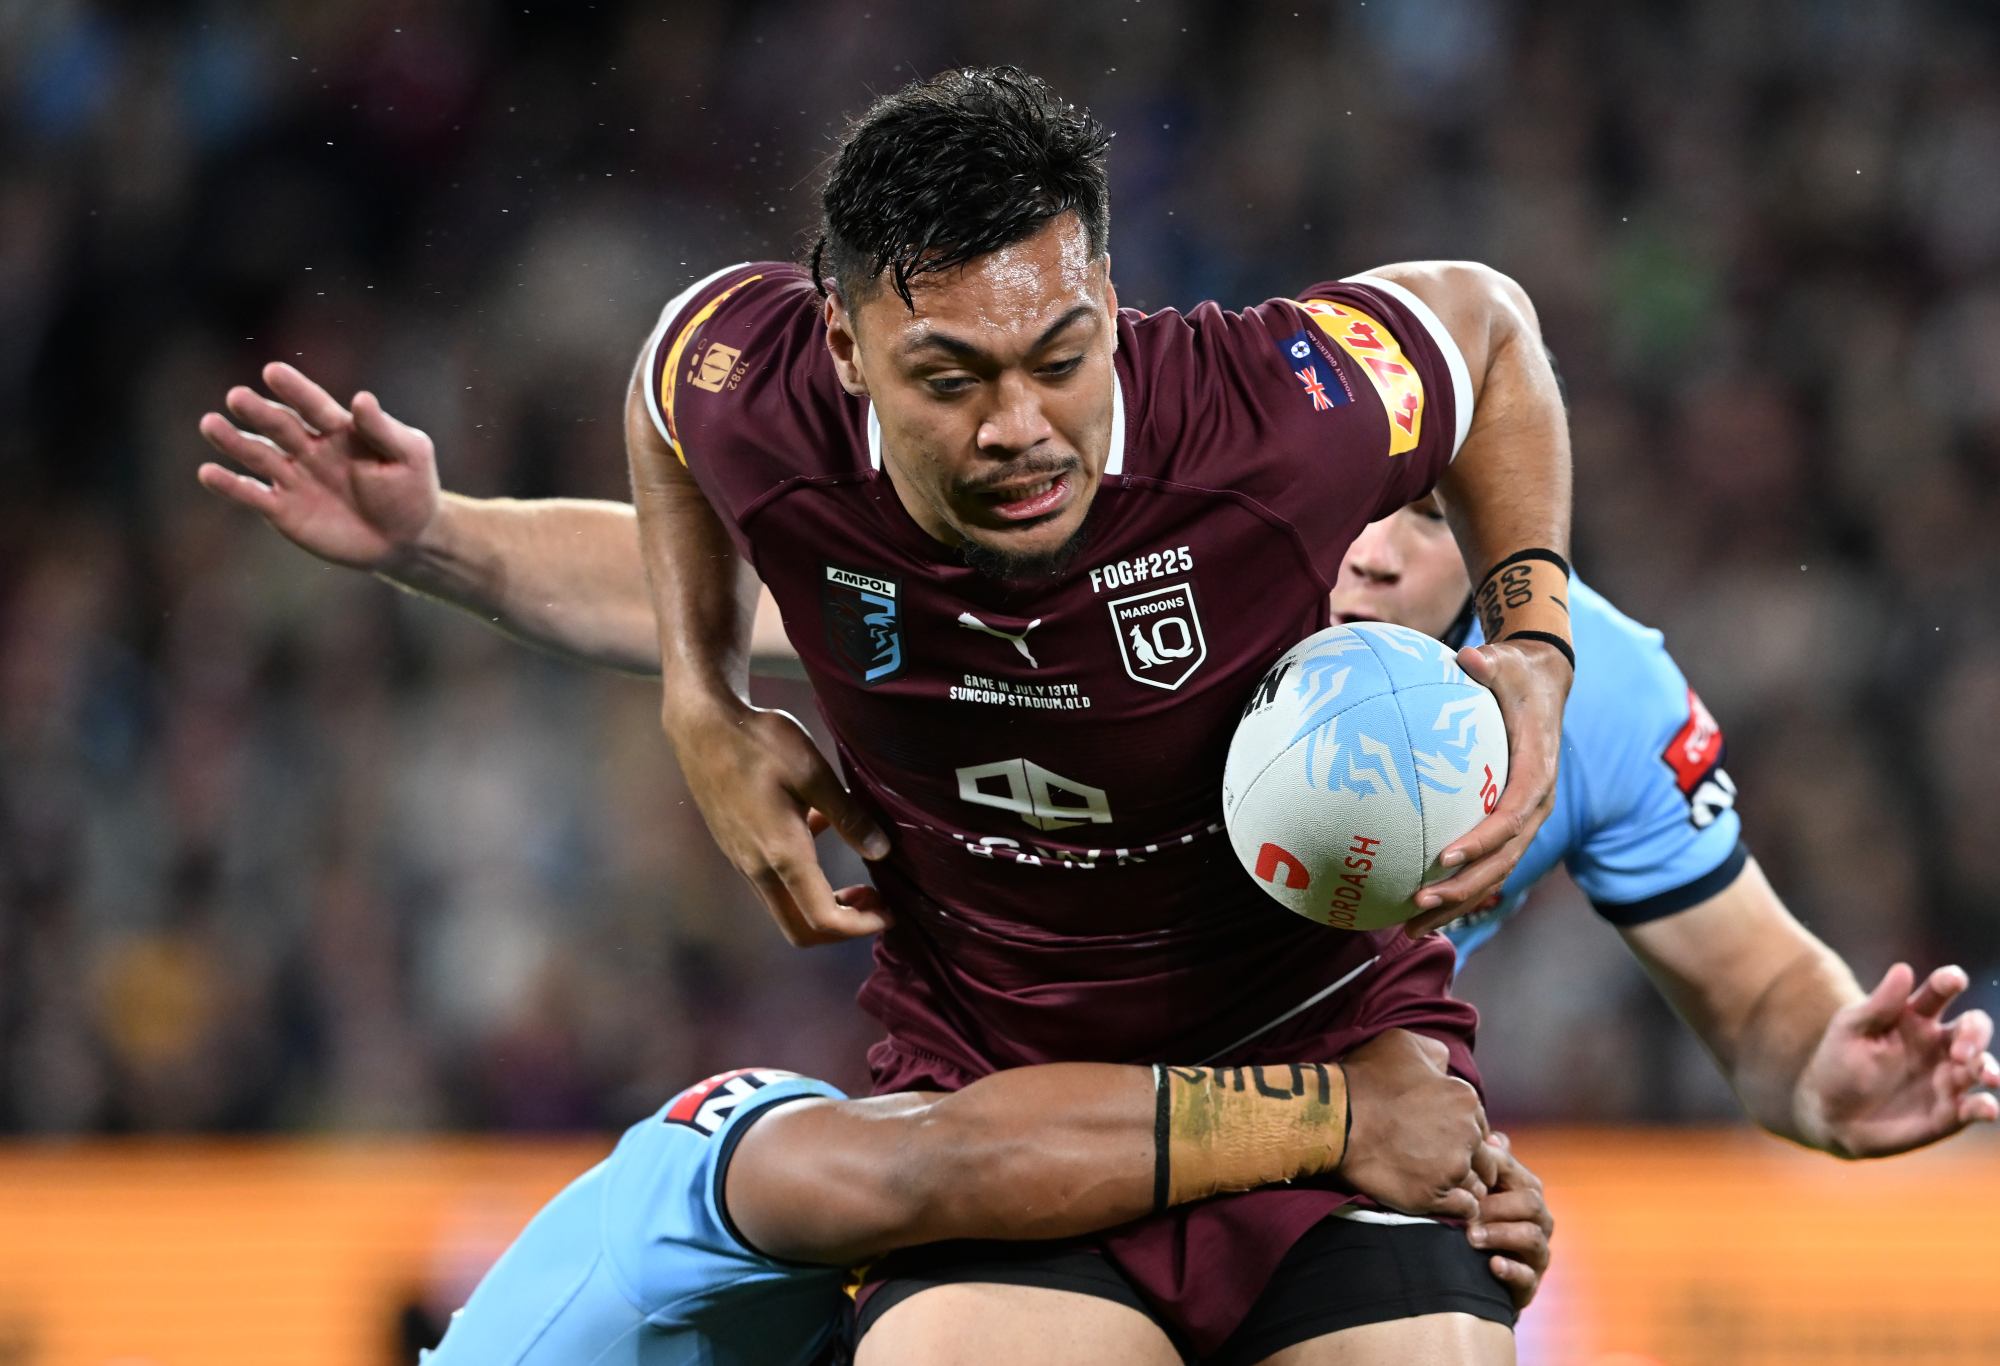 BRISBANE, AUSTRALIA - JULY 13: Jeremiah Nanai of the Maroons is tackled during game three of the State of Origin Series between the Queensland Maroons and the New South Wales Blues at Suncorp Stadium on July 13, 2022 in Brisbane, Australia. (Photo by Bradley Kanaris/Getty Images)